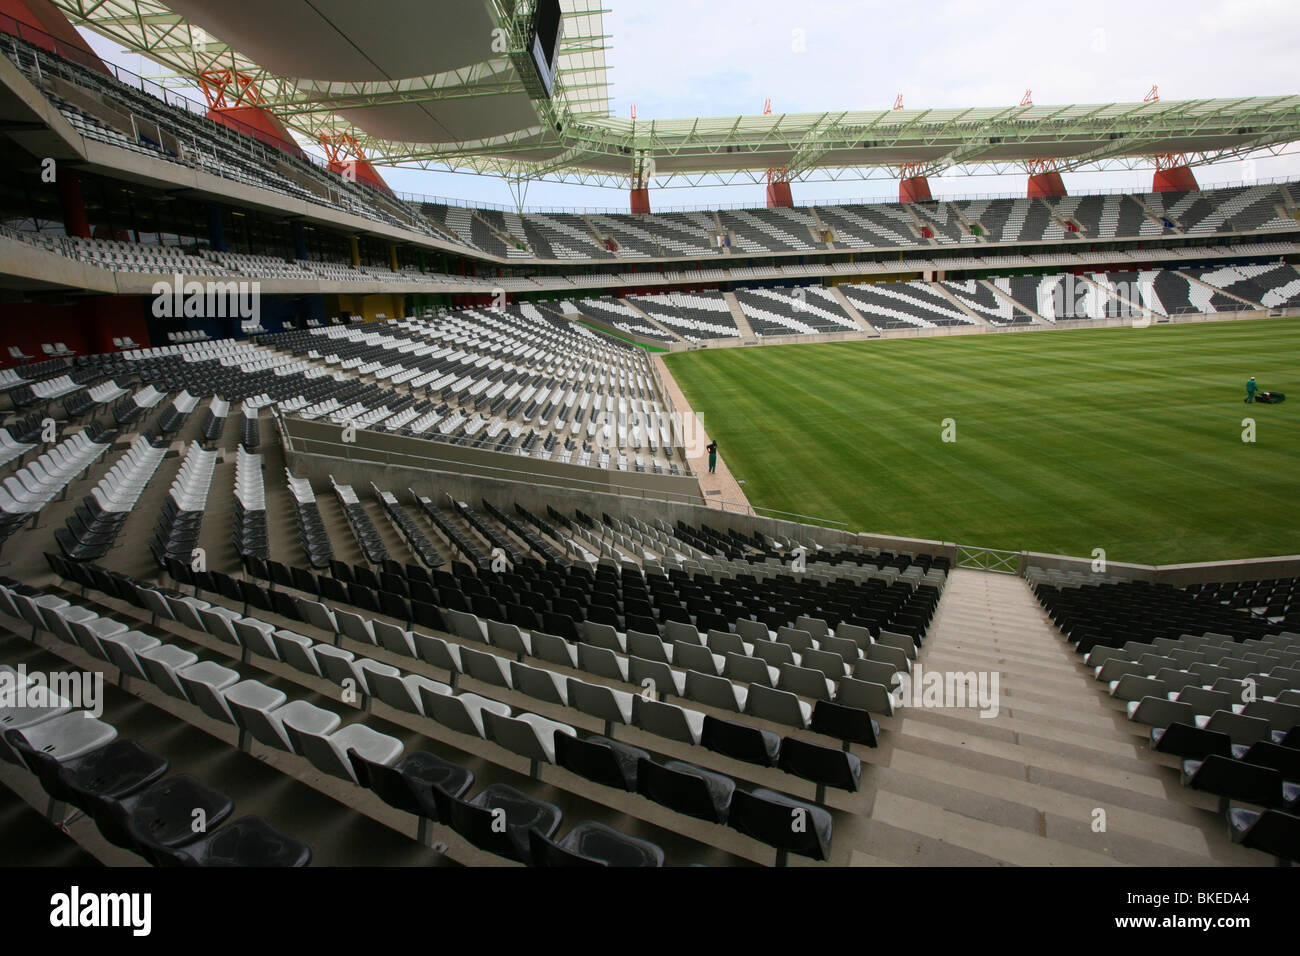 Interior of the Mbombela stadium In Nelspruit  showing the zebra-striped seating an a lush, green, playing surface Stock Photo